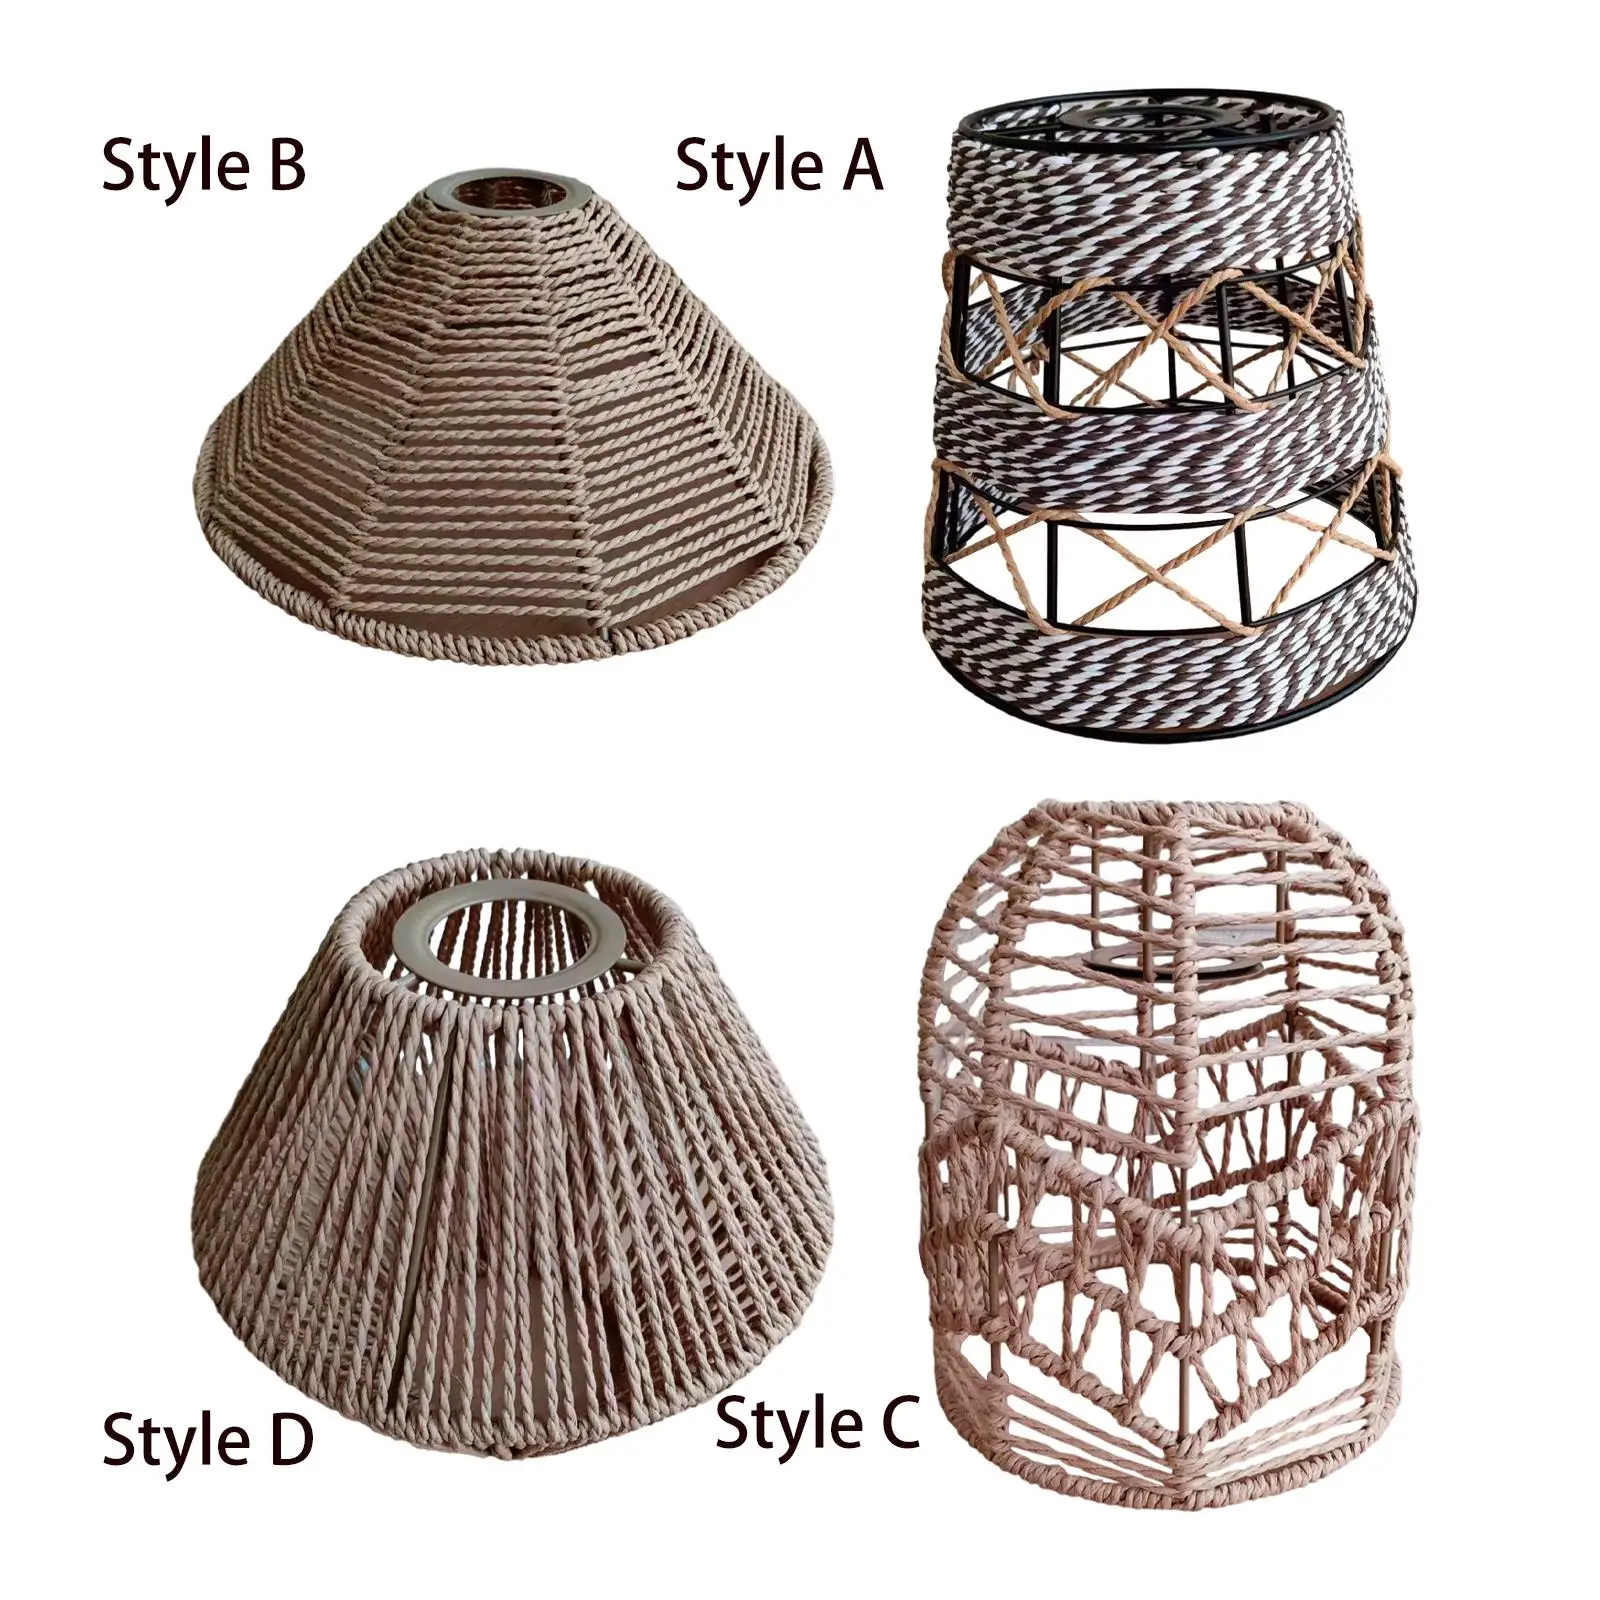 Light Shade DIY Lighting Fixtures Decoration Dustproof Rustic Woven Lampshade for House Restaurant Teahouse Bedroom Kitchen